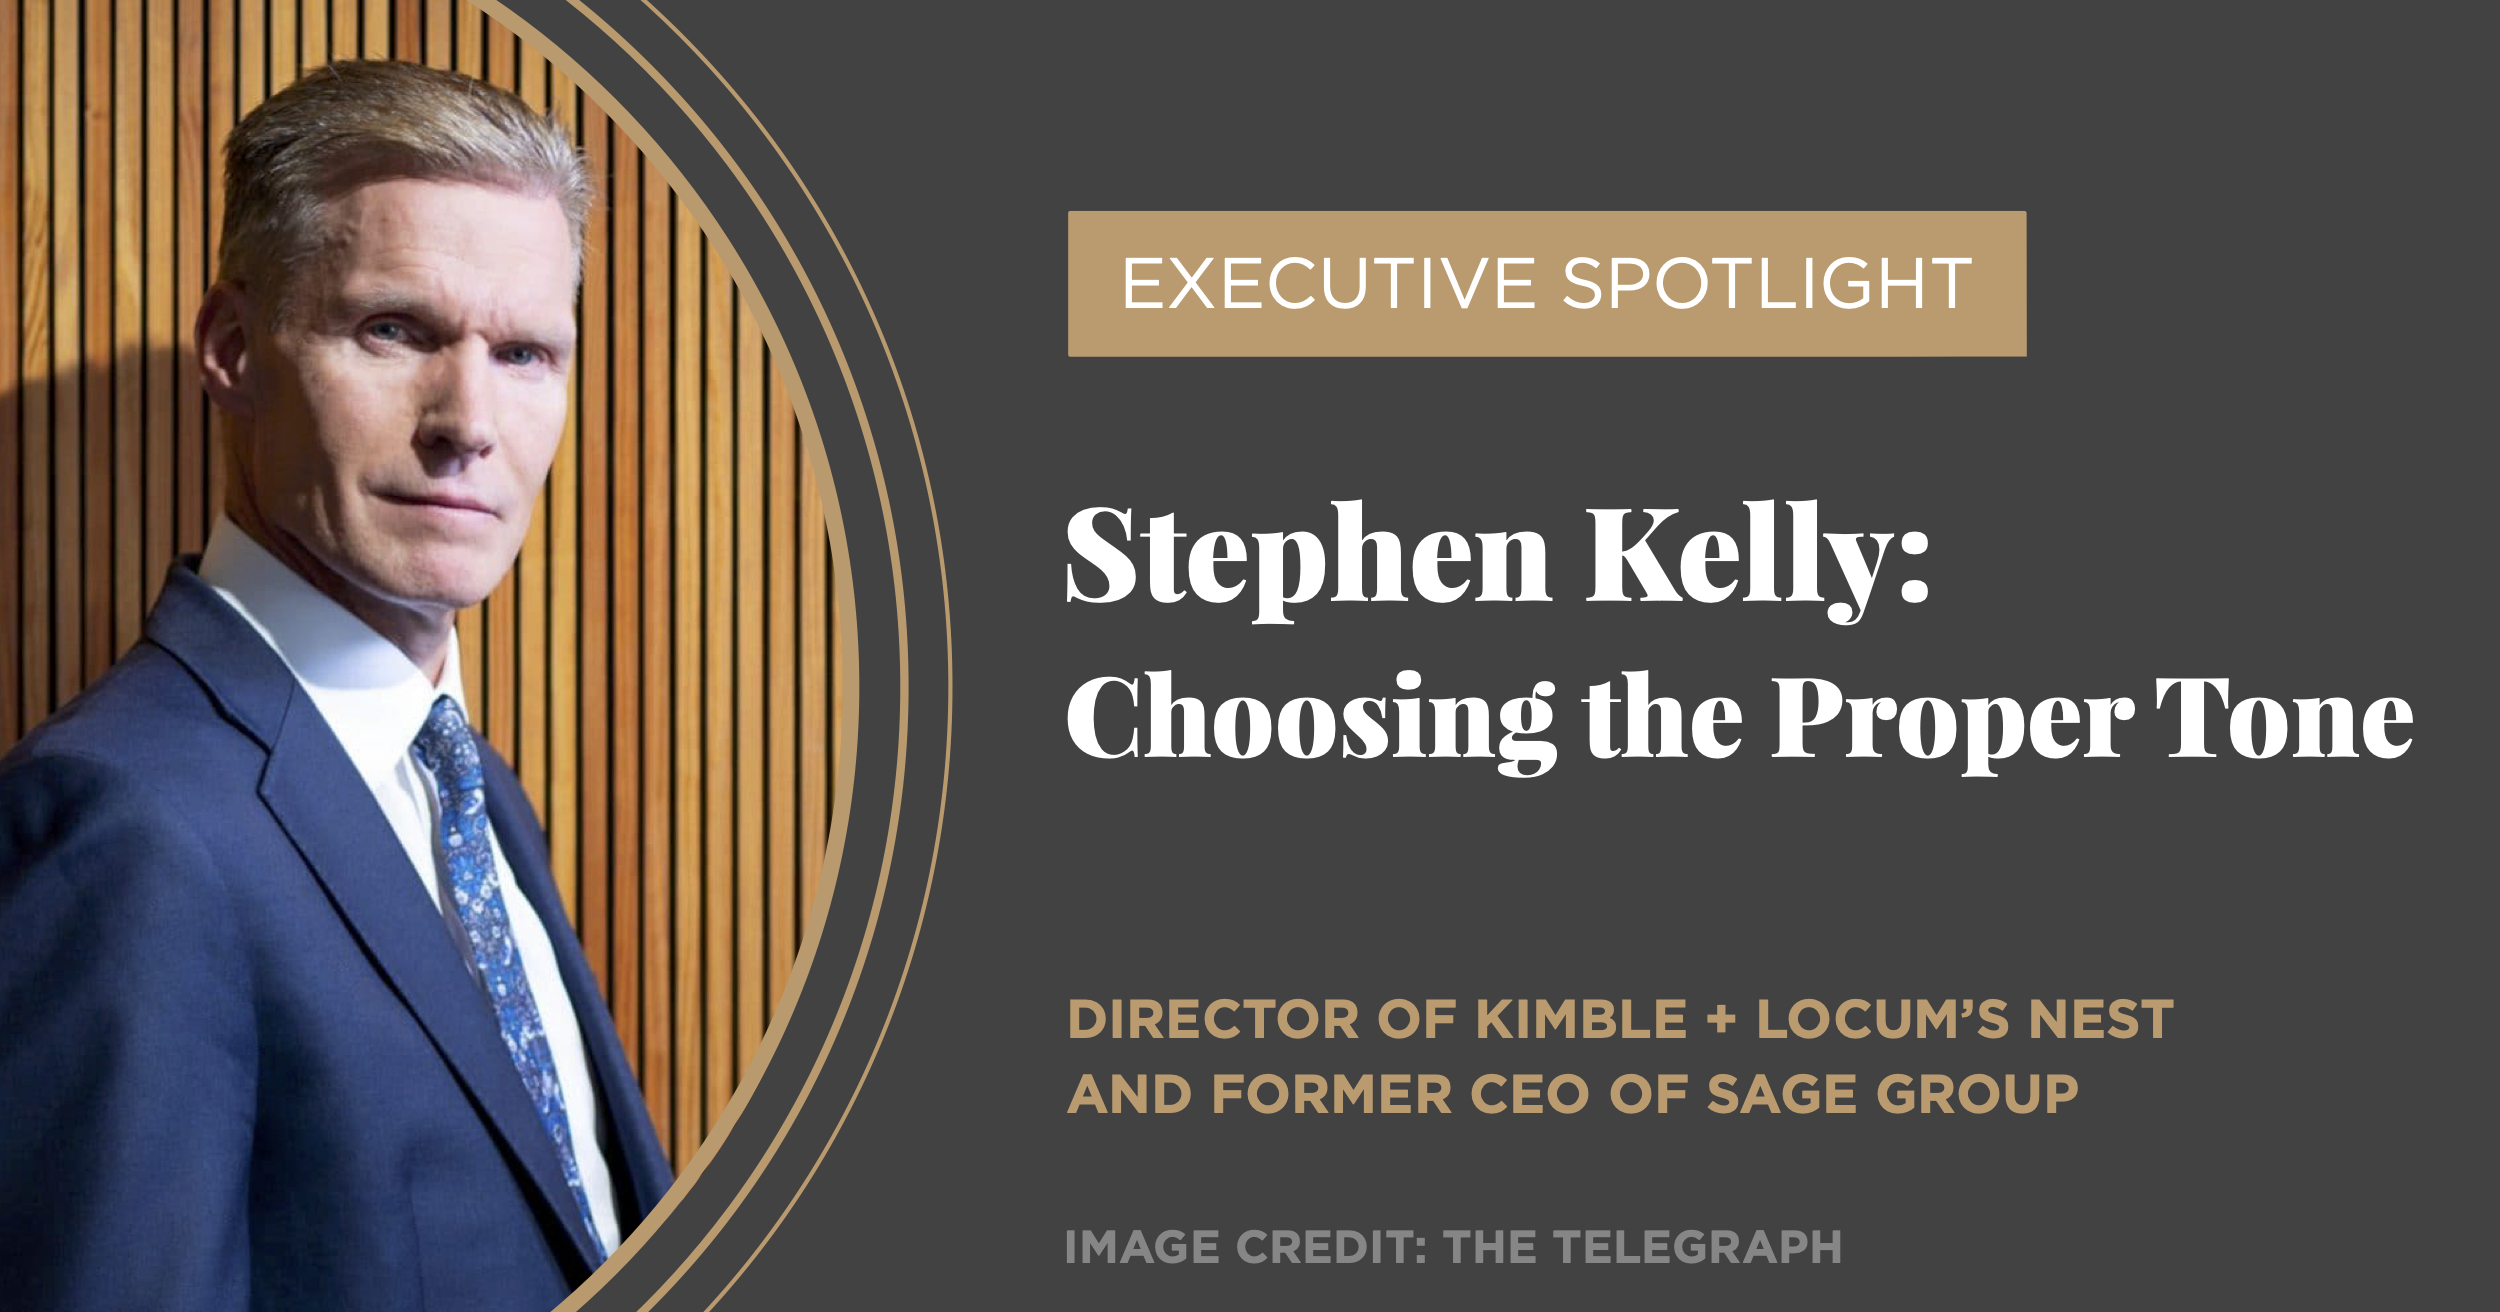 Stephen Kelly, Director of Kimble Apps and Locum's Nest